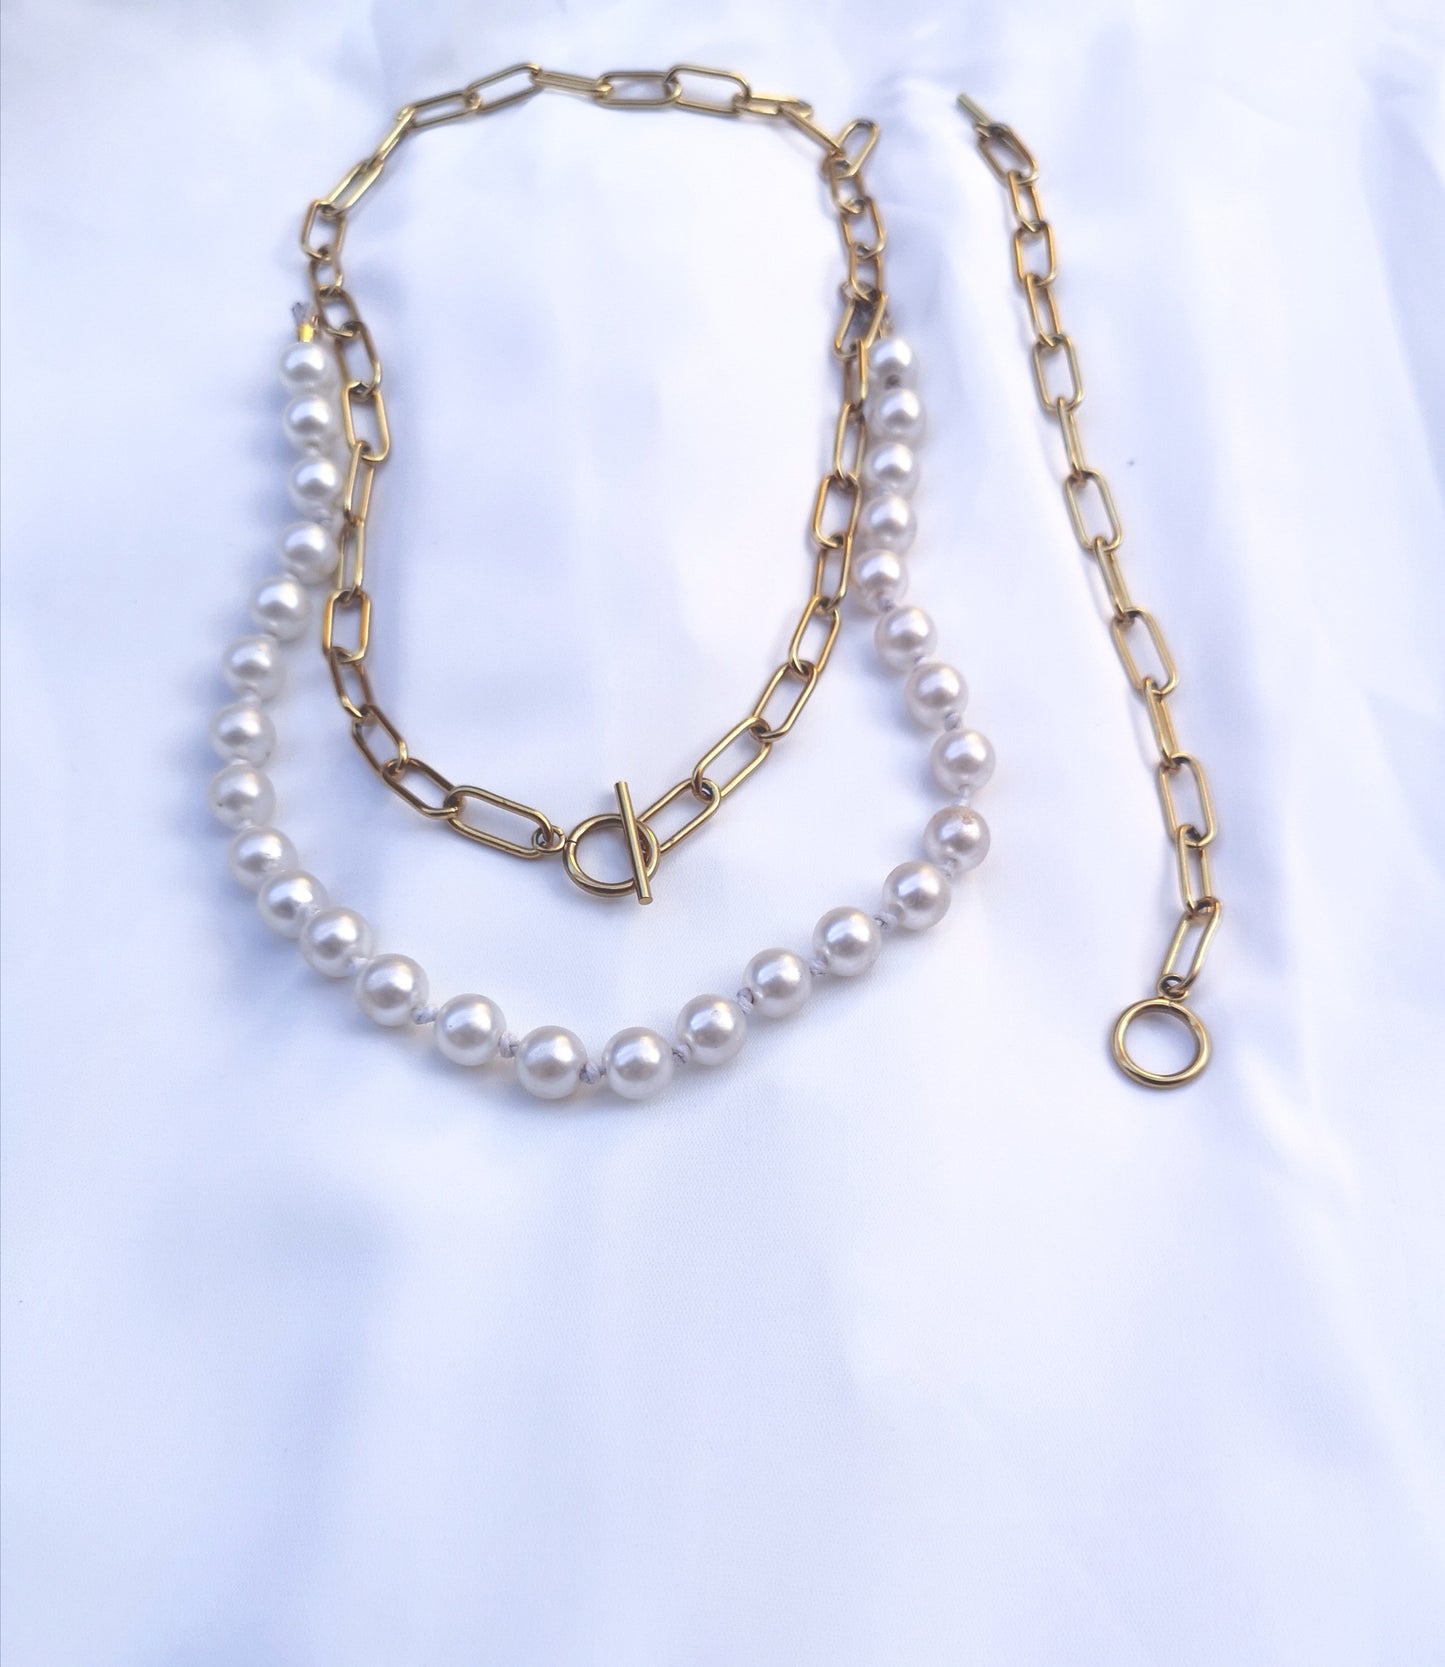 stainless steel chain and bracelet sets with its adjustable pearl necklace